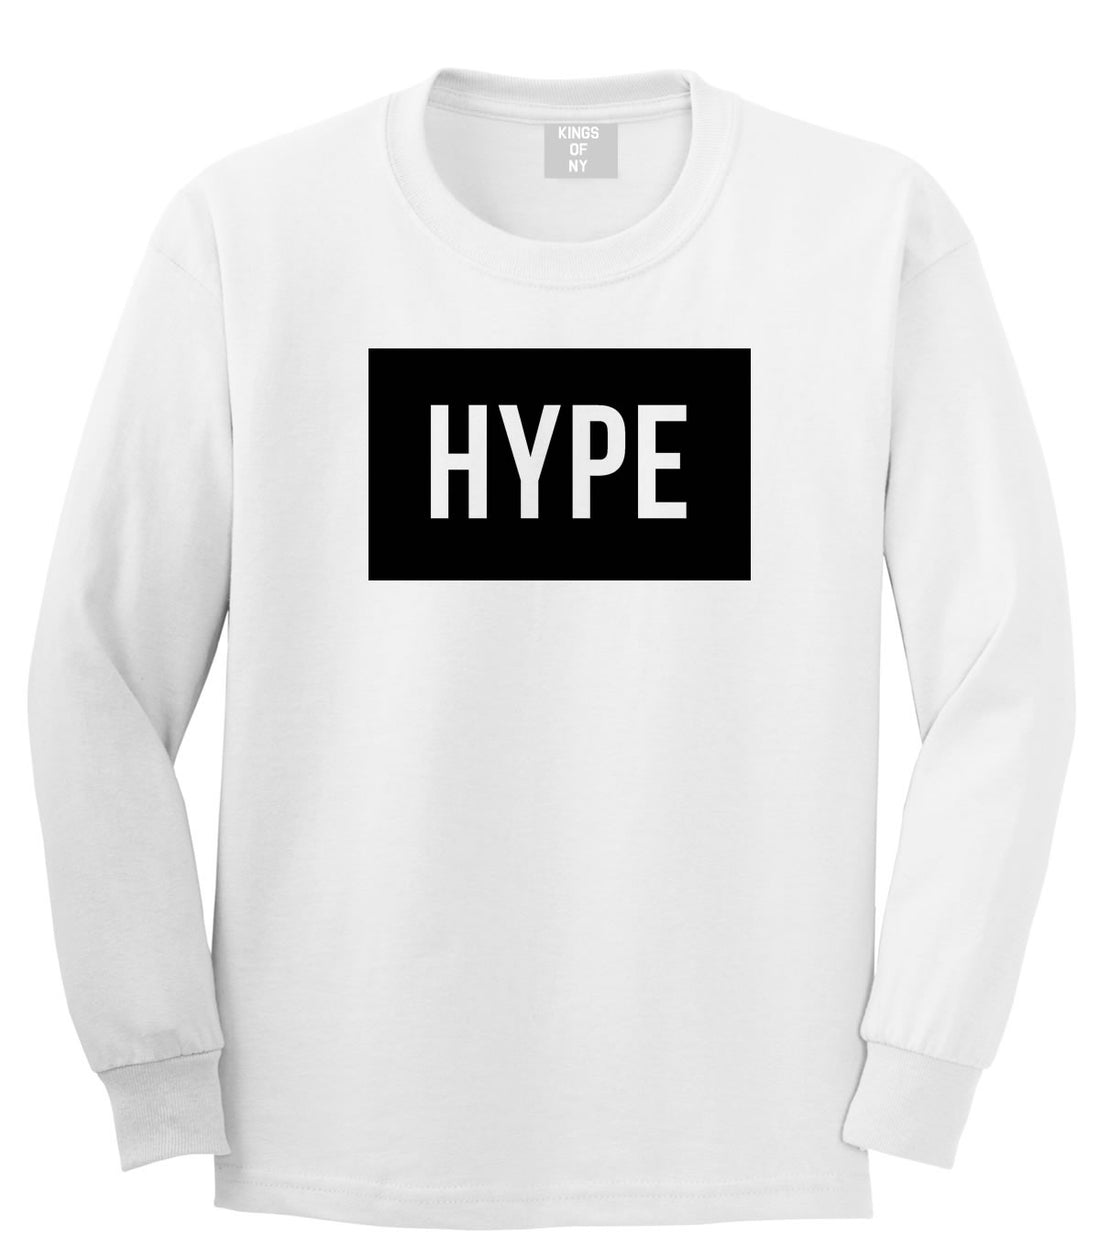 Hype Style Streetwear Brand Logo White by Kings Of NY Long Sleeve Boys Kids T-Shirt in White by Kings Of NY